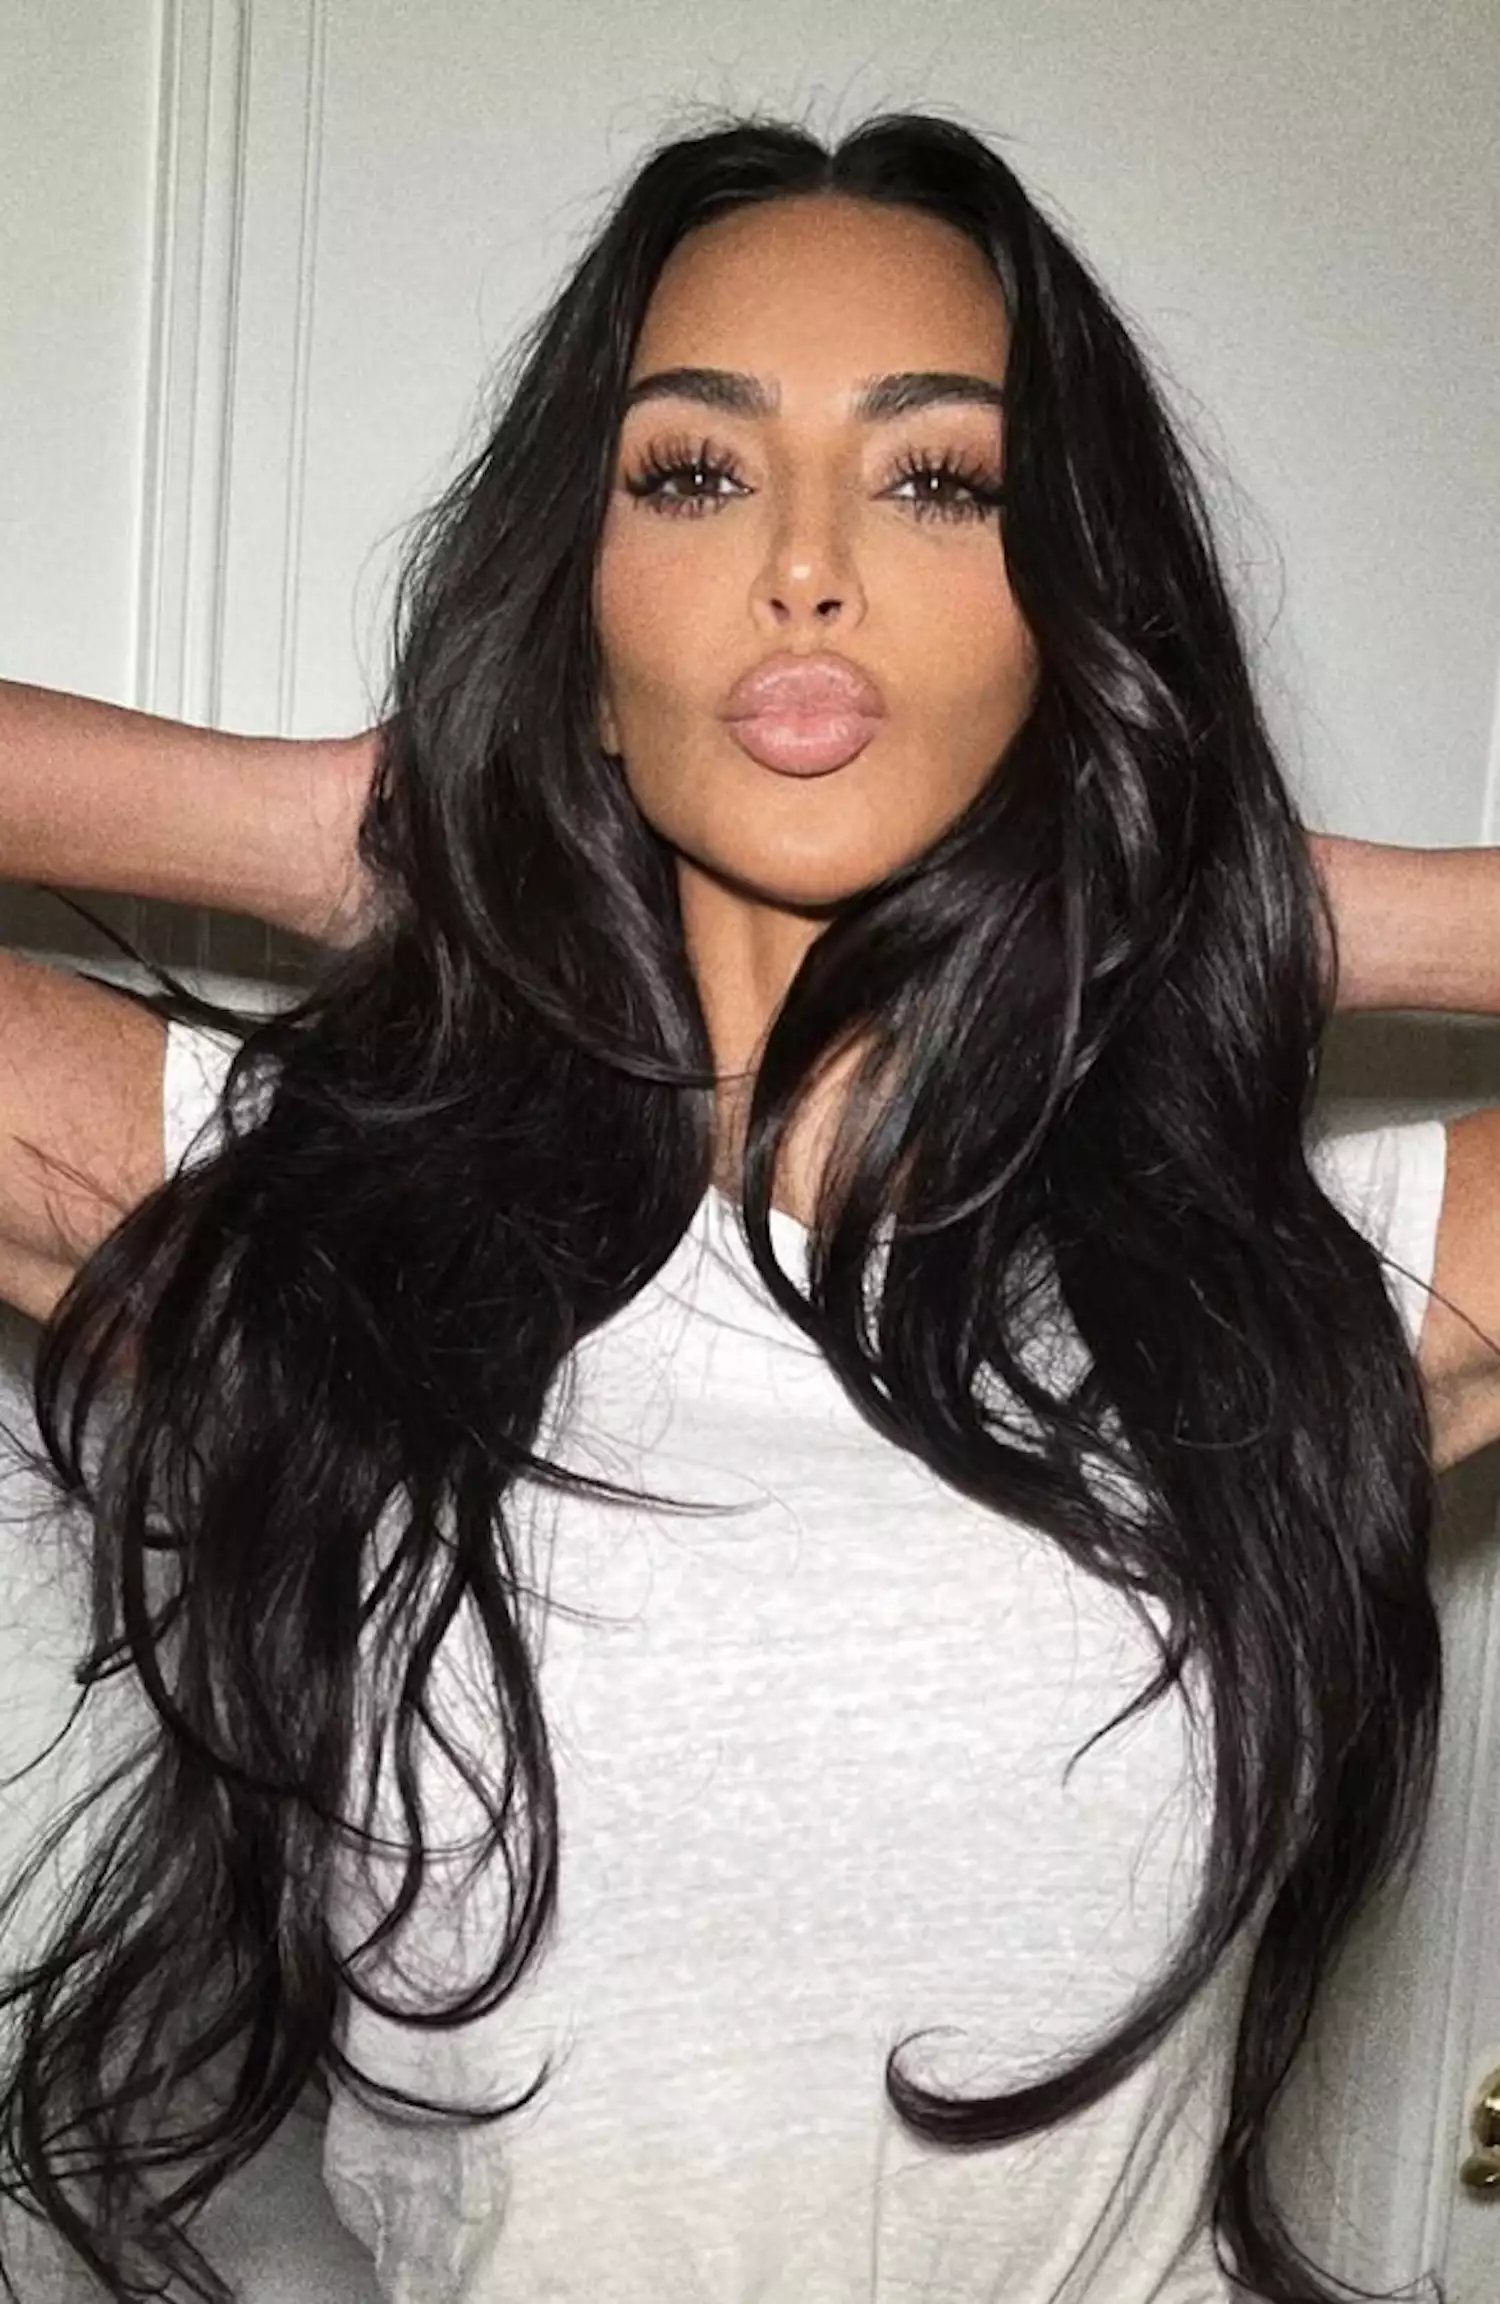 Kim Kardashian's Greatest Hair Moments: Bouncy Blowout With Extensions